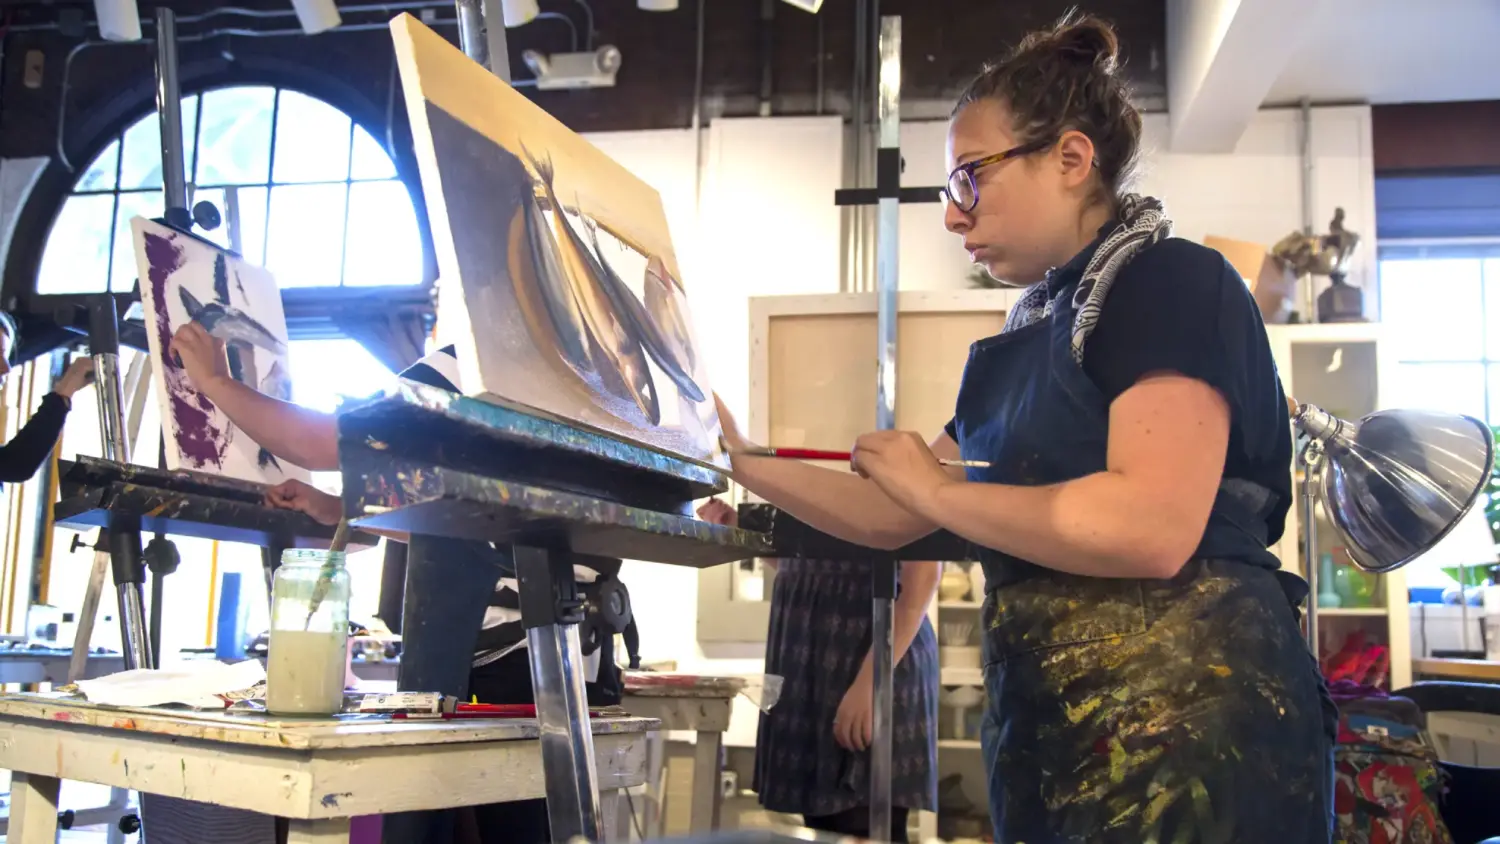 Students work upright on canvas paintings in an art studio